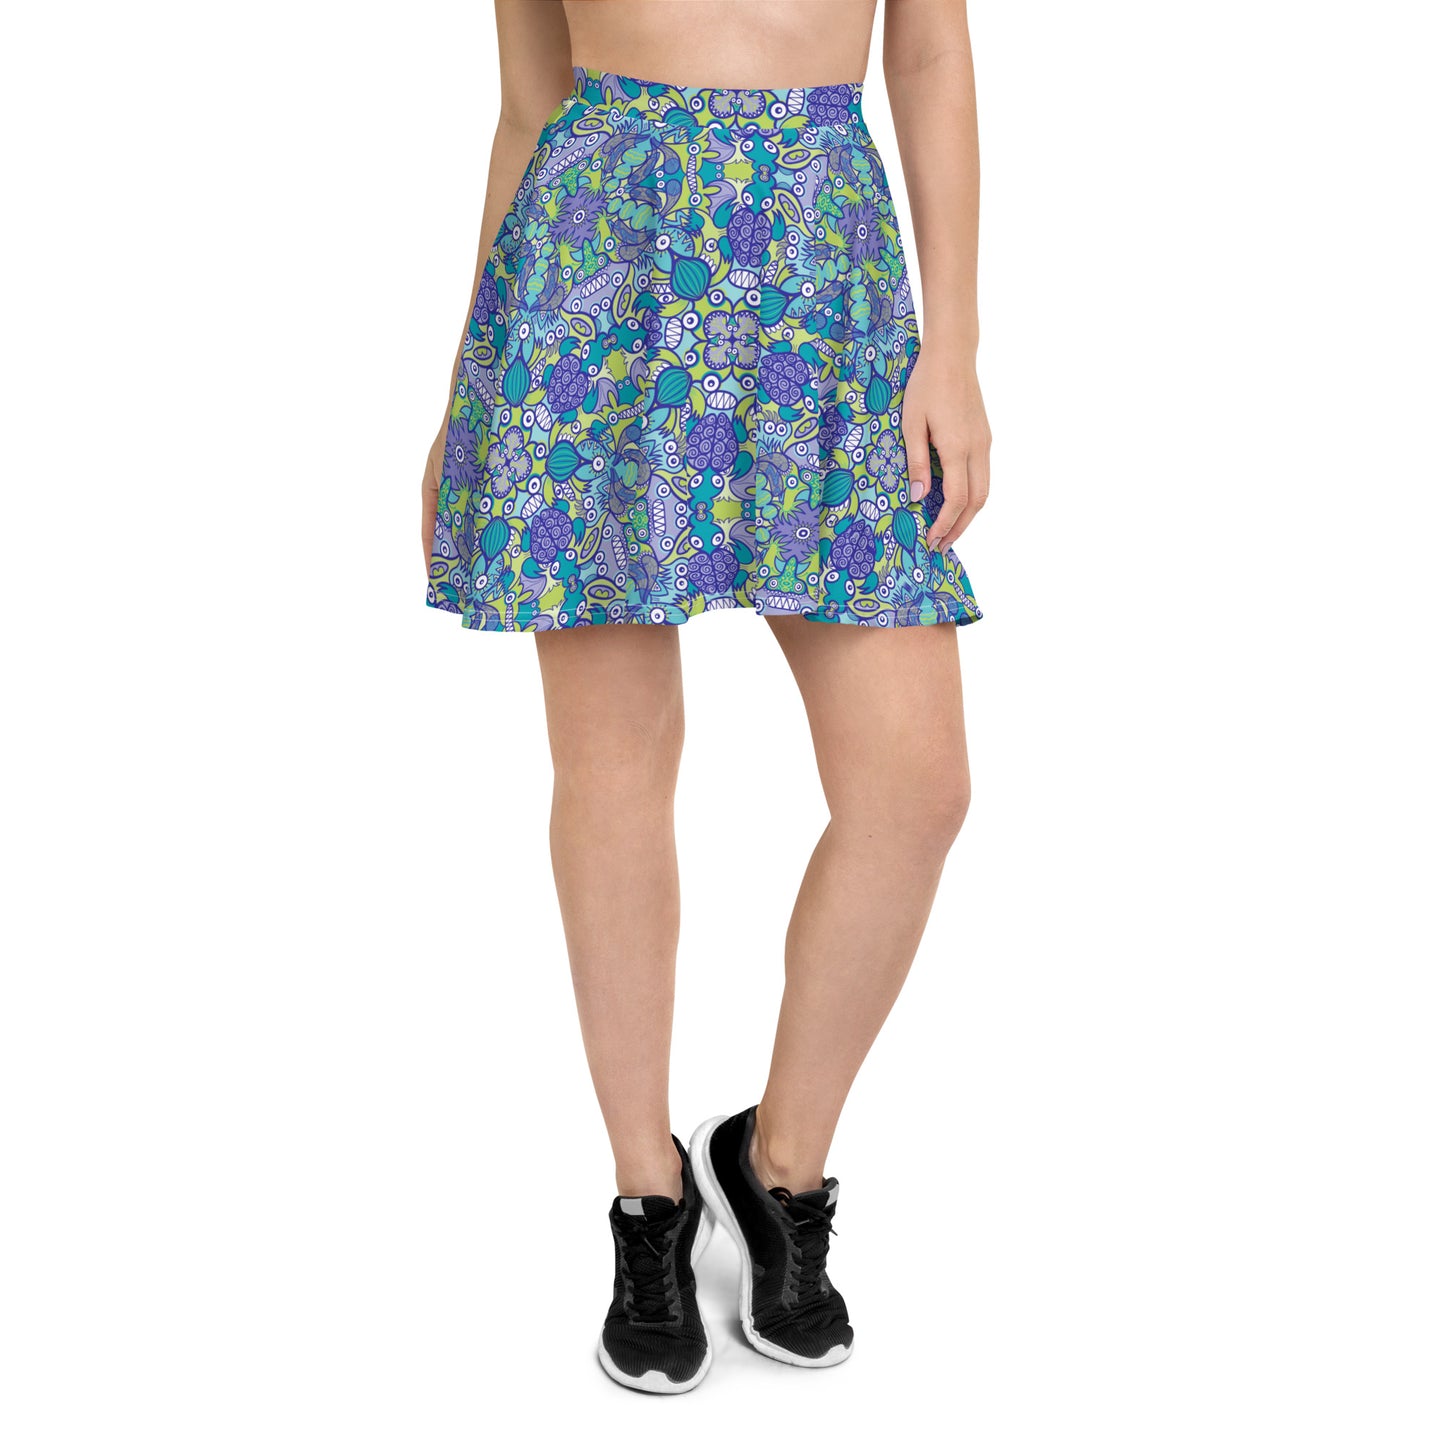 Once upon a time in an ocean full of life - Skater Skirt. Front view